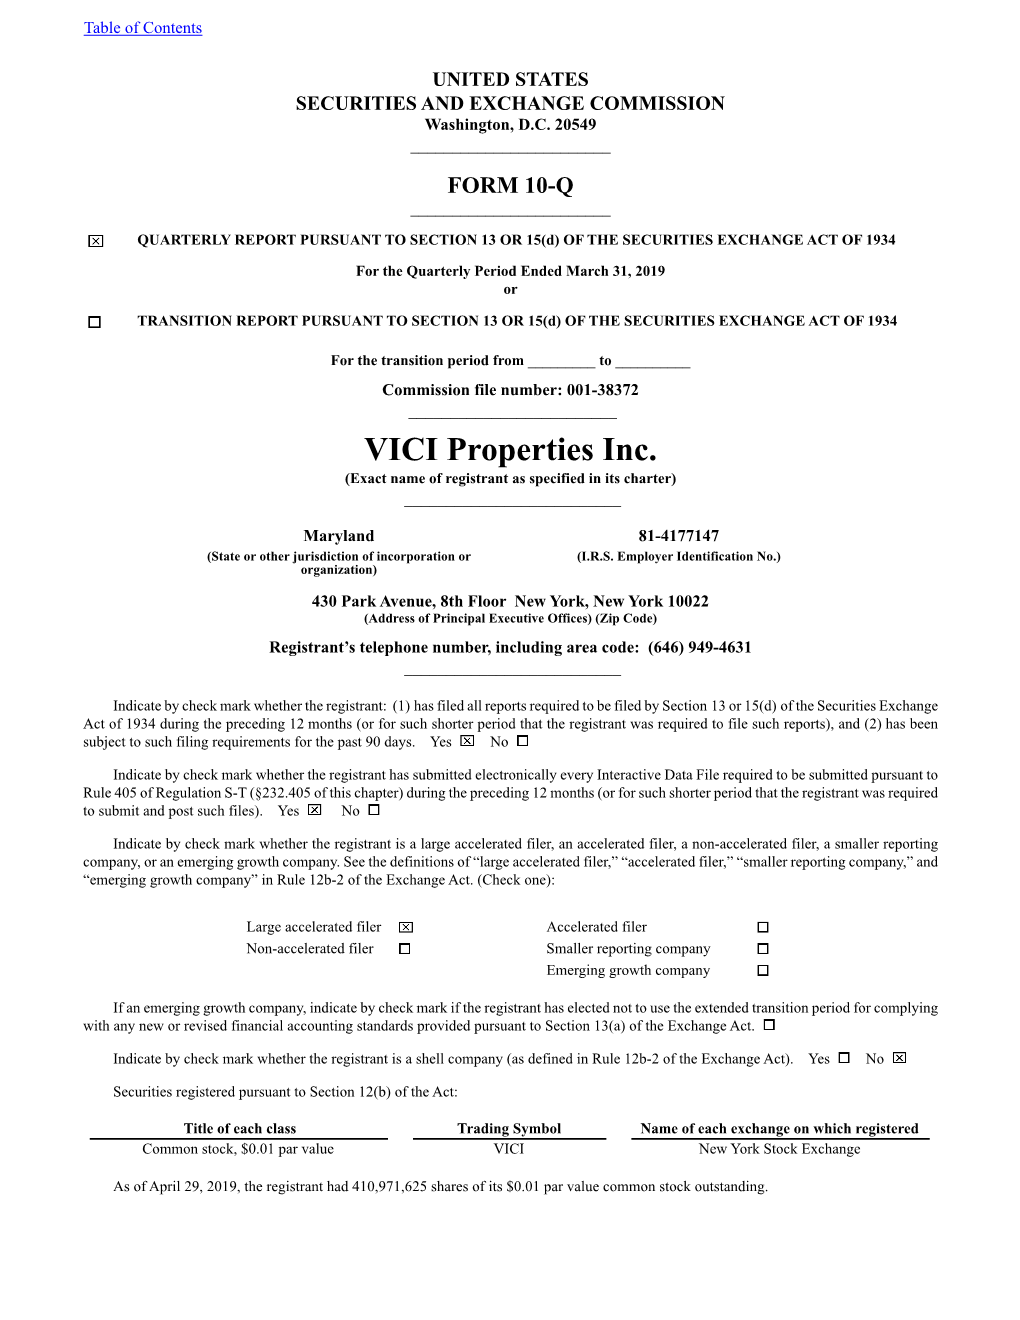 VICI Properties Inc. (Exact Name of Registrant As Specified in Its Charter) ______